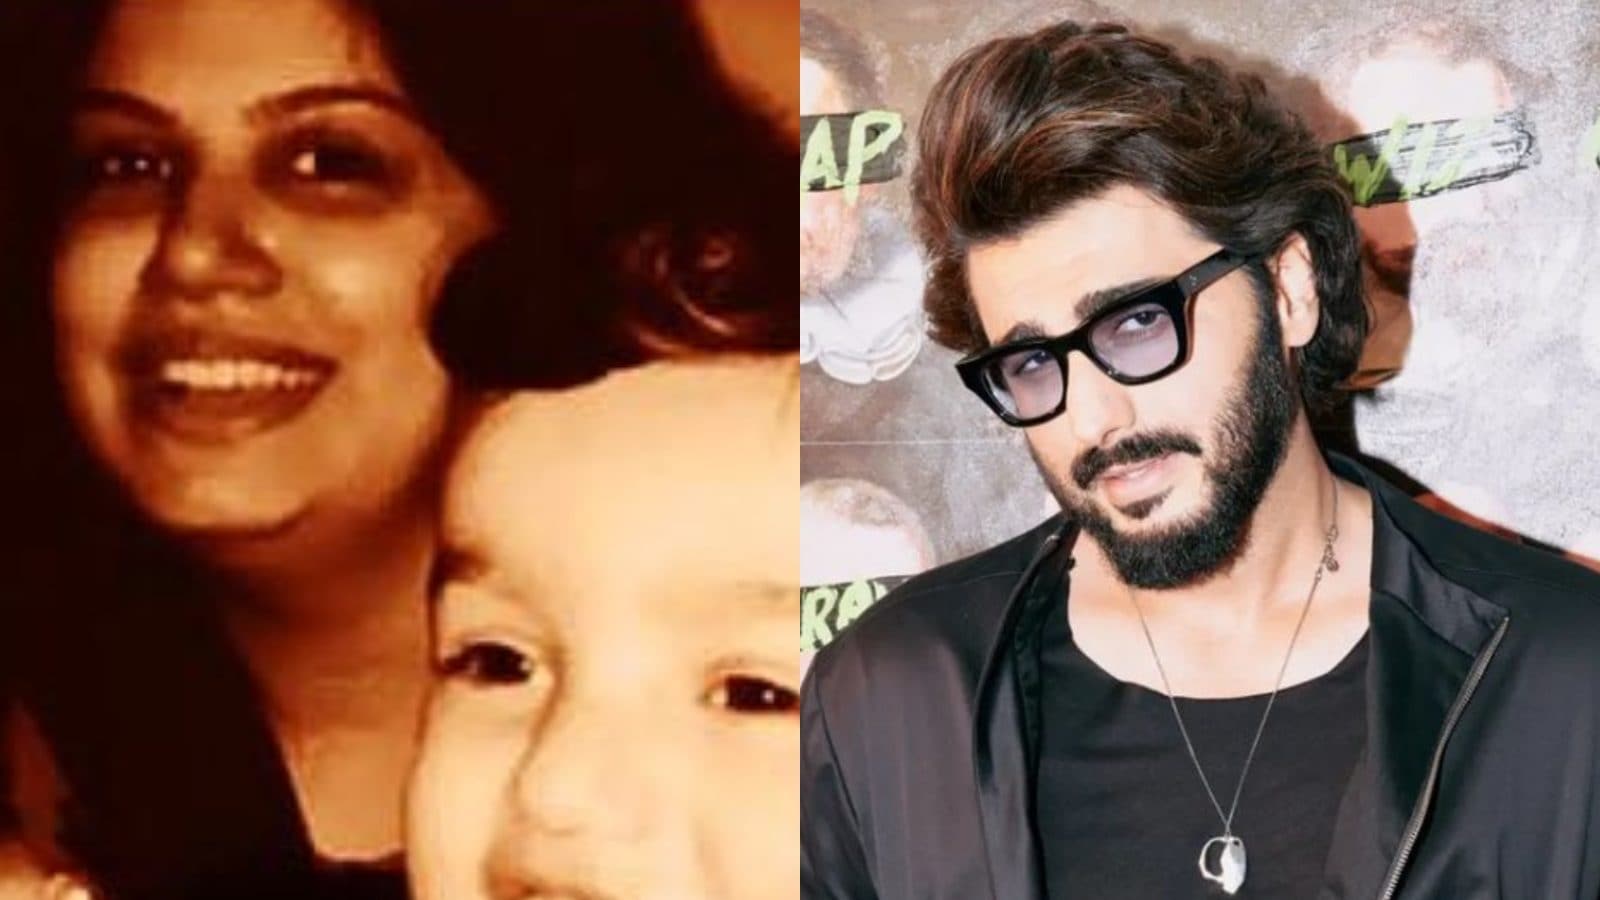 Arjun Kapoor says ‘I will never give up’ as he writes emotional note on his mother’s birthday